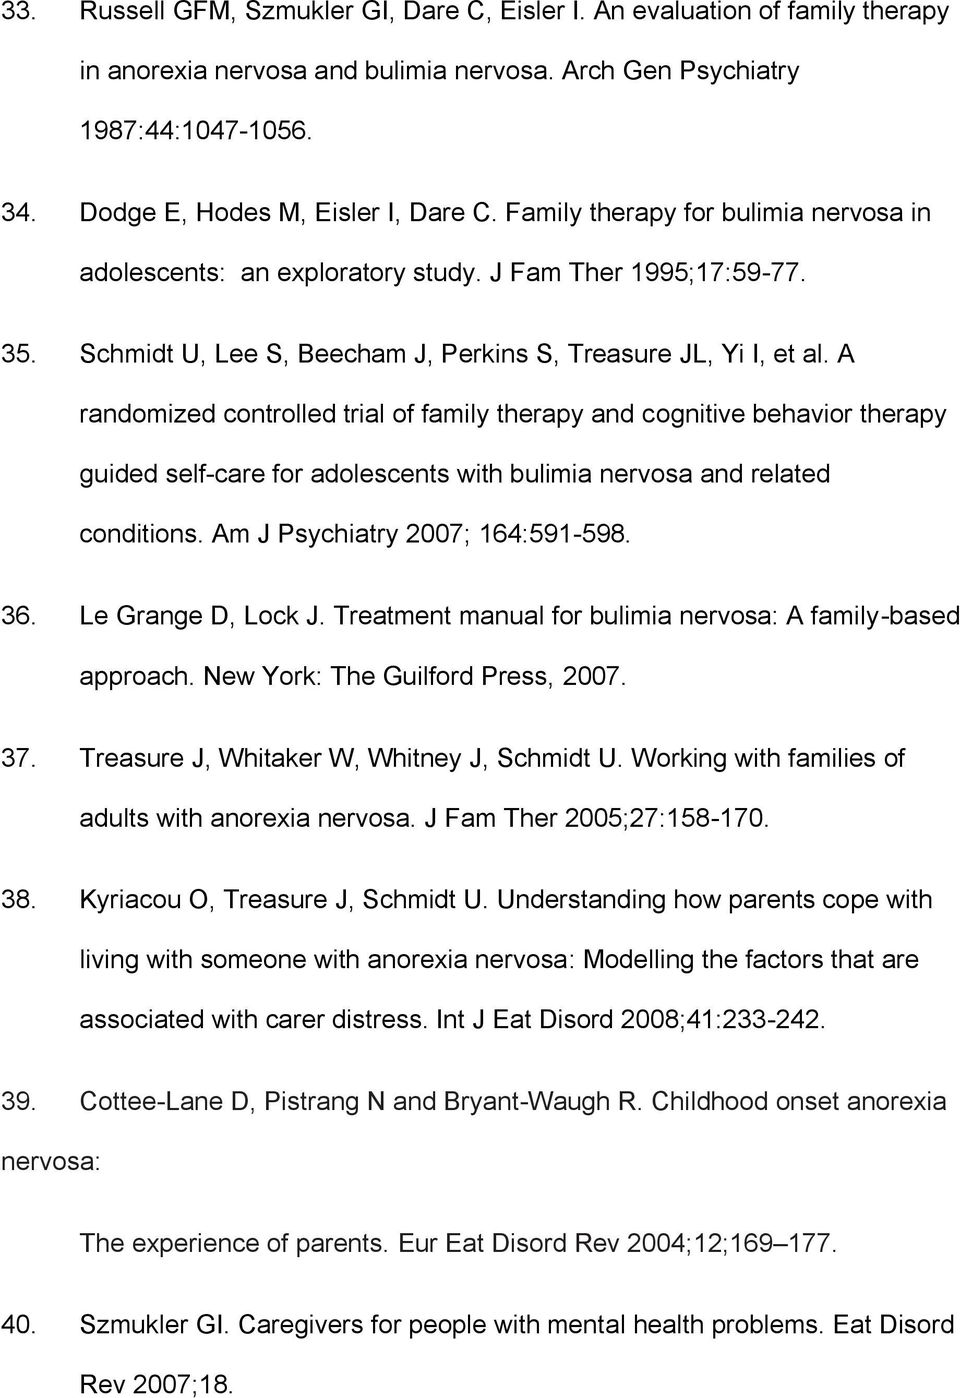 A randomized controlled trial of family therapy and cognitive behavior therapy guided self-care for adolescents with bulimia nervosa and related conditions. Am J Psychiatry 2007; 164:591-598. 36.